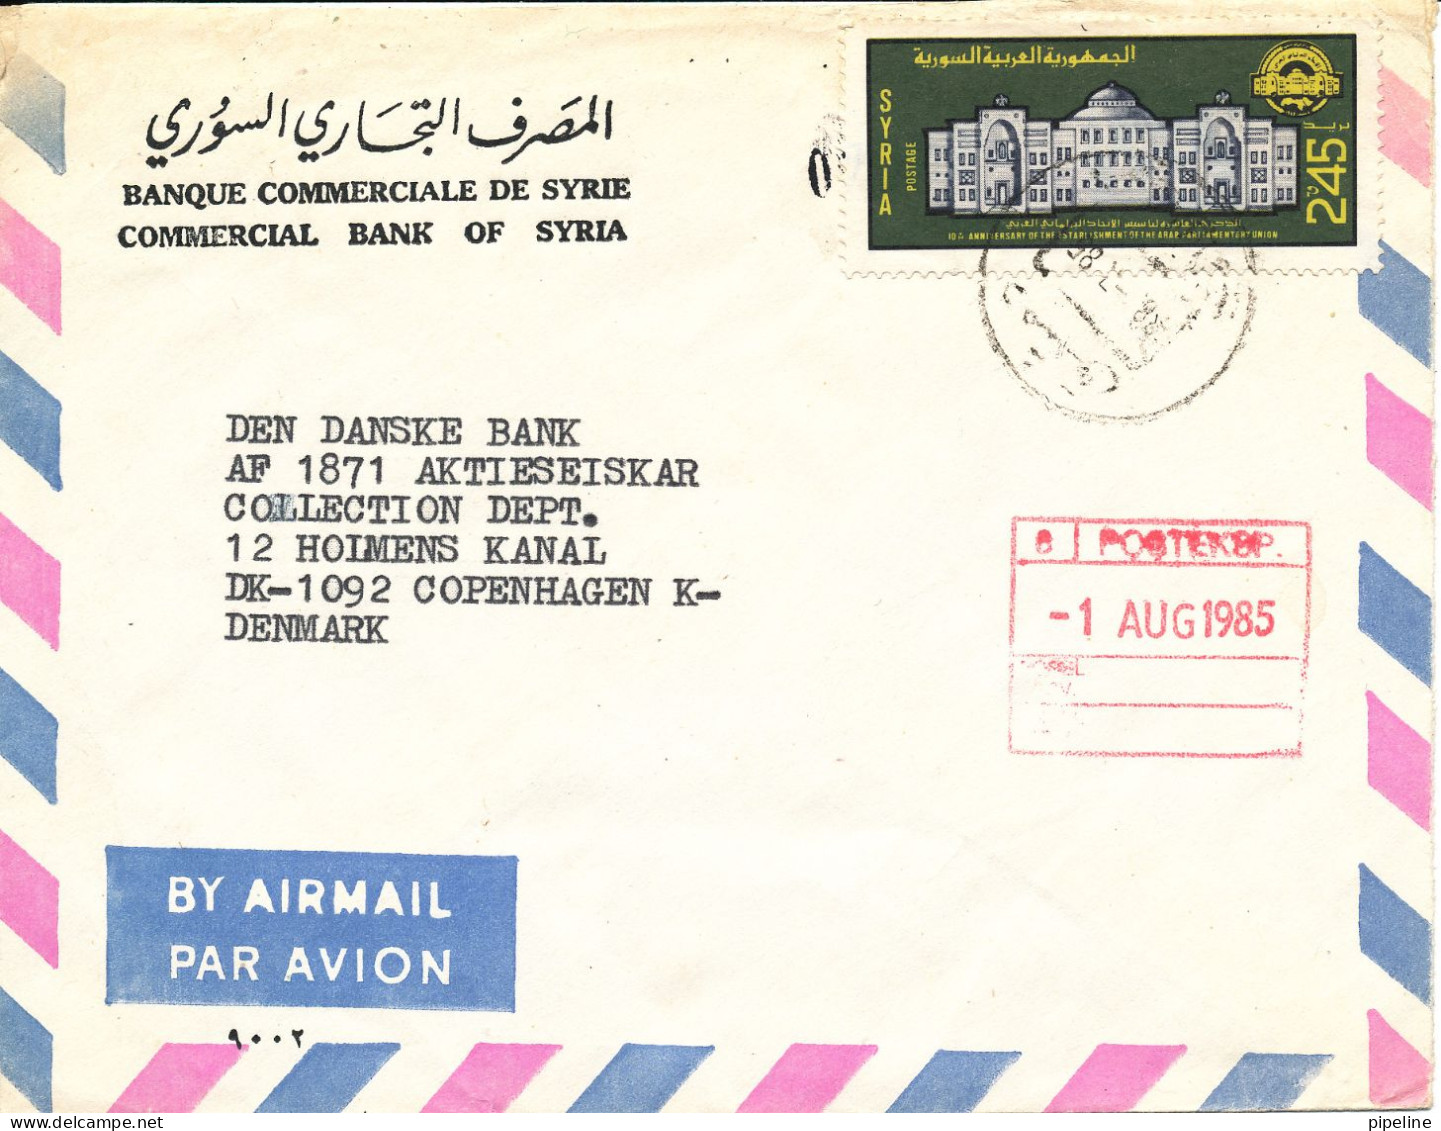 Syria Air Mail Bank Cover Sent To Denmark 28-7-1985 (Commercial Bank Of Syria) - Syrien